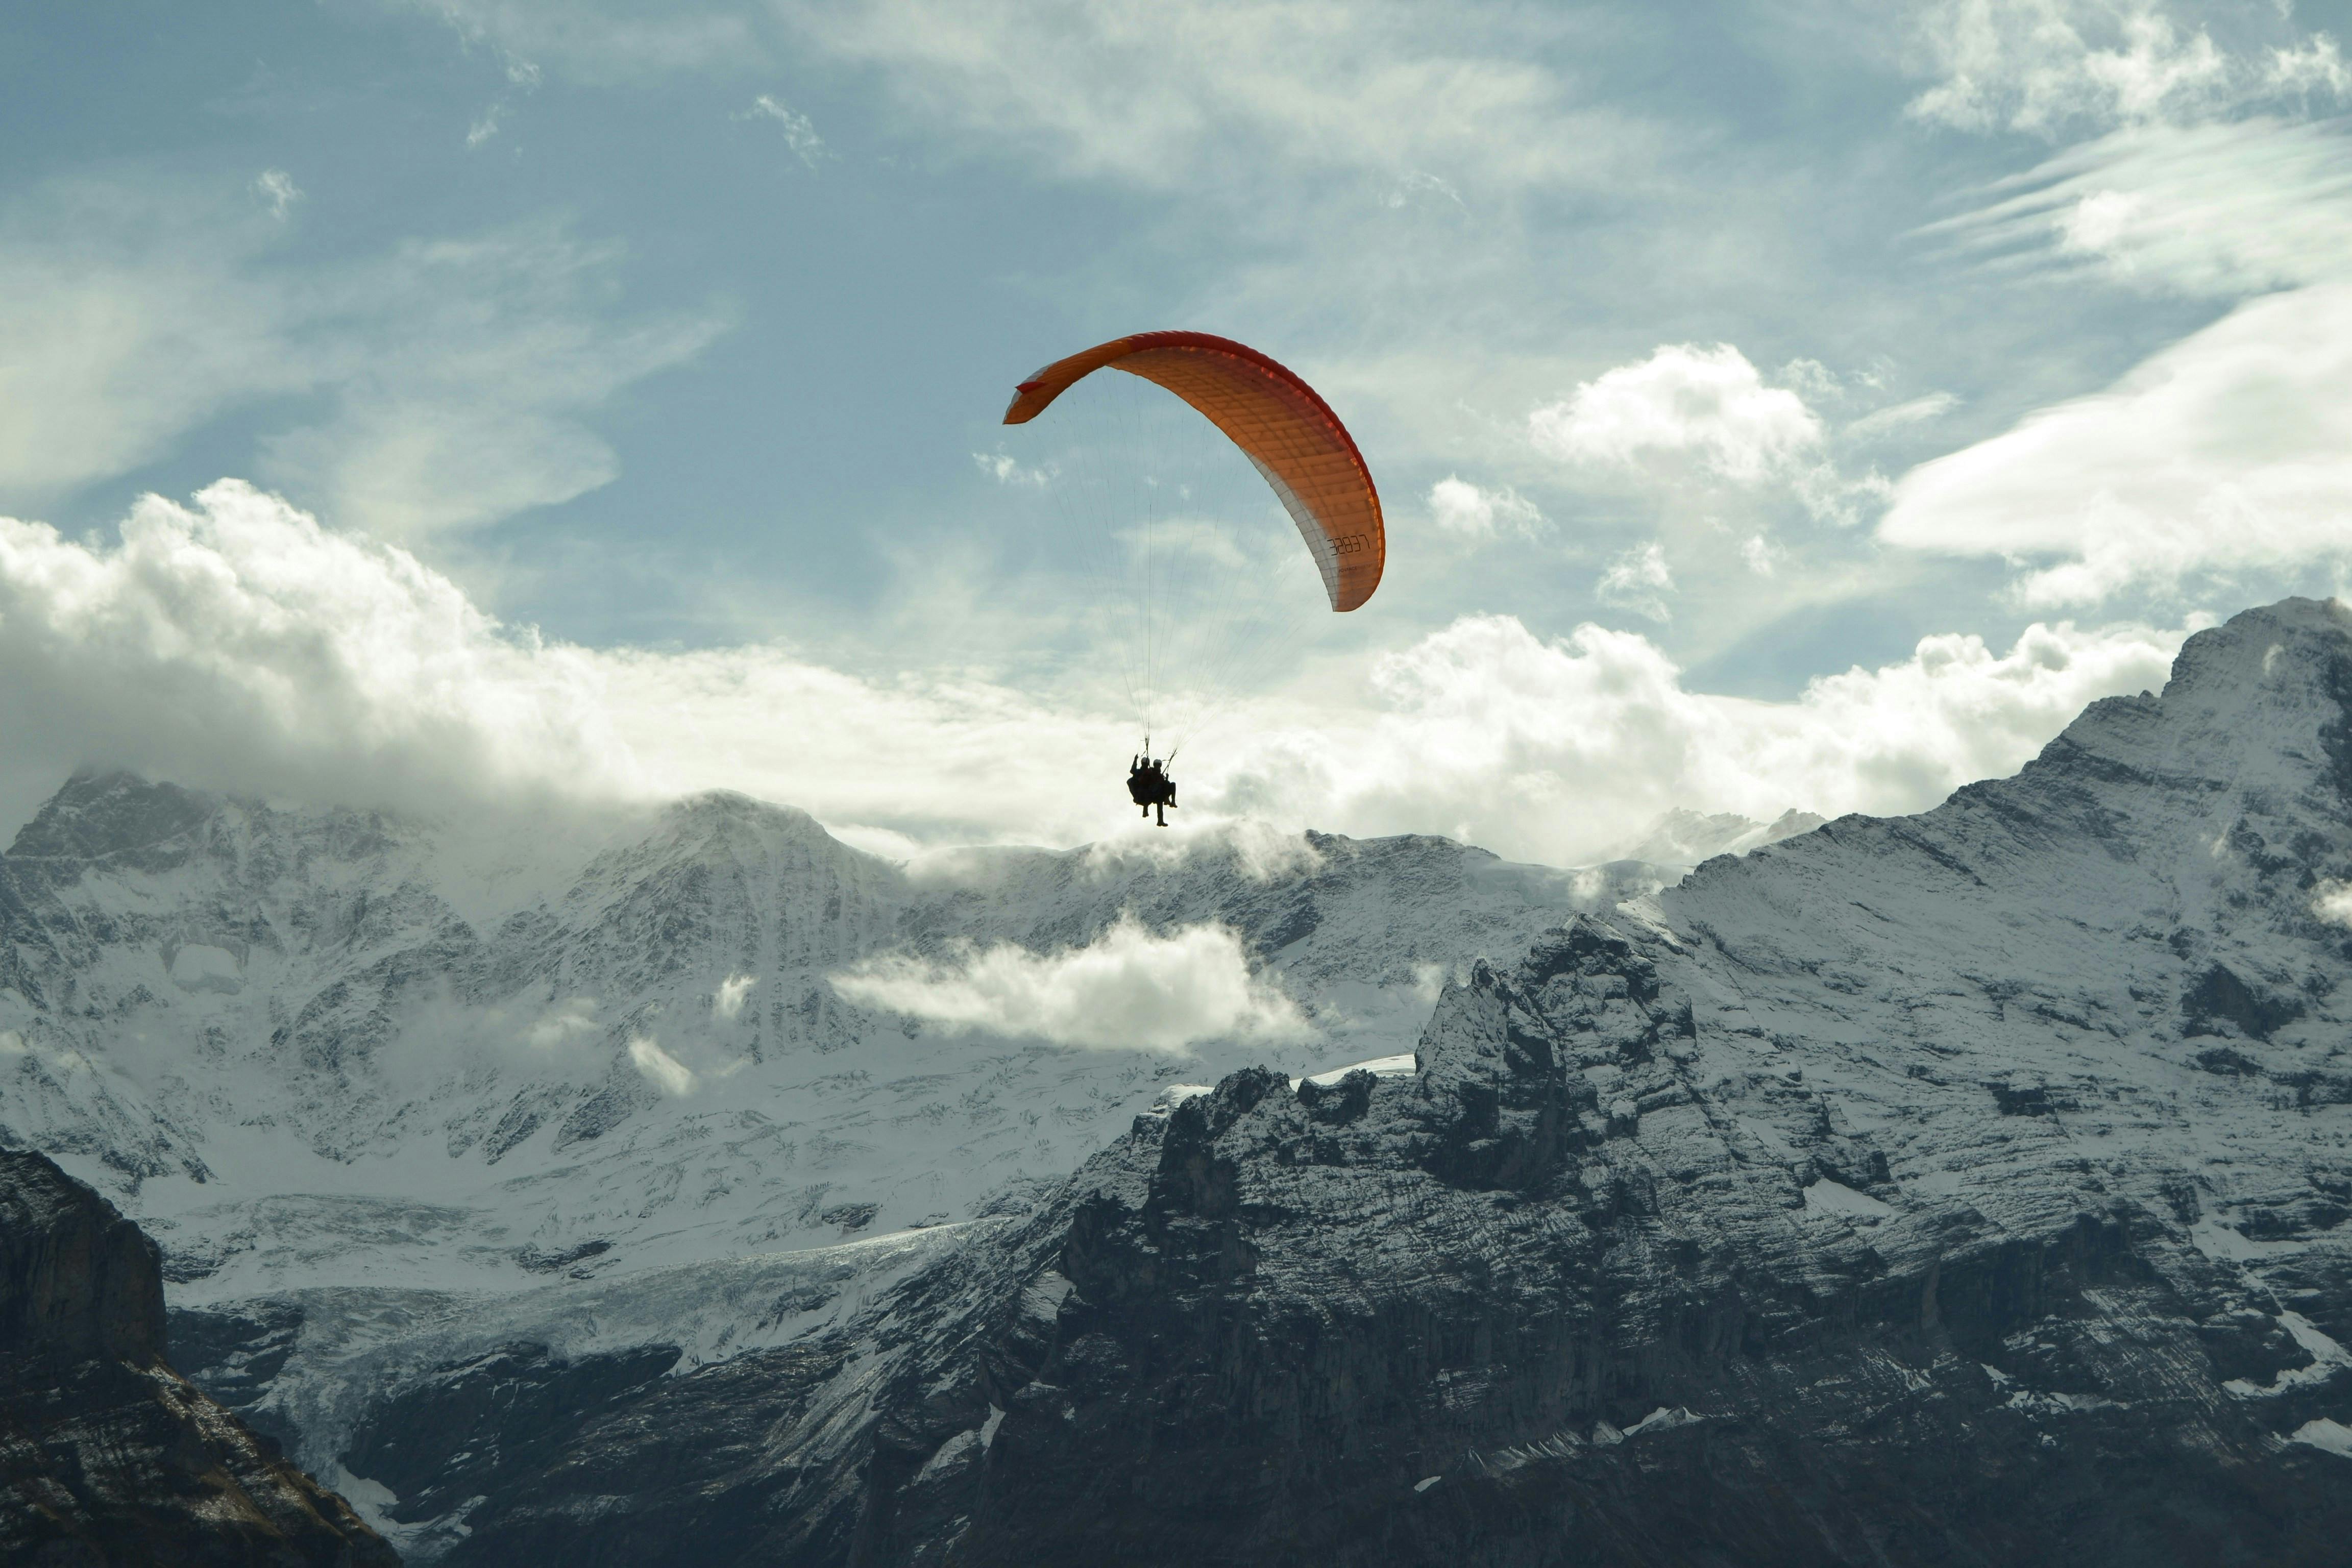 A person paragliding over a snow covered mountain.